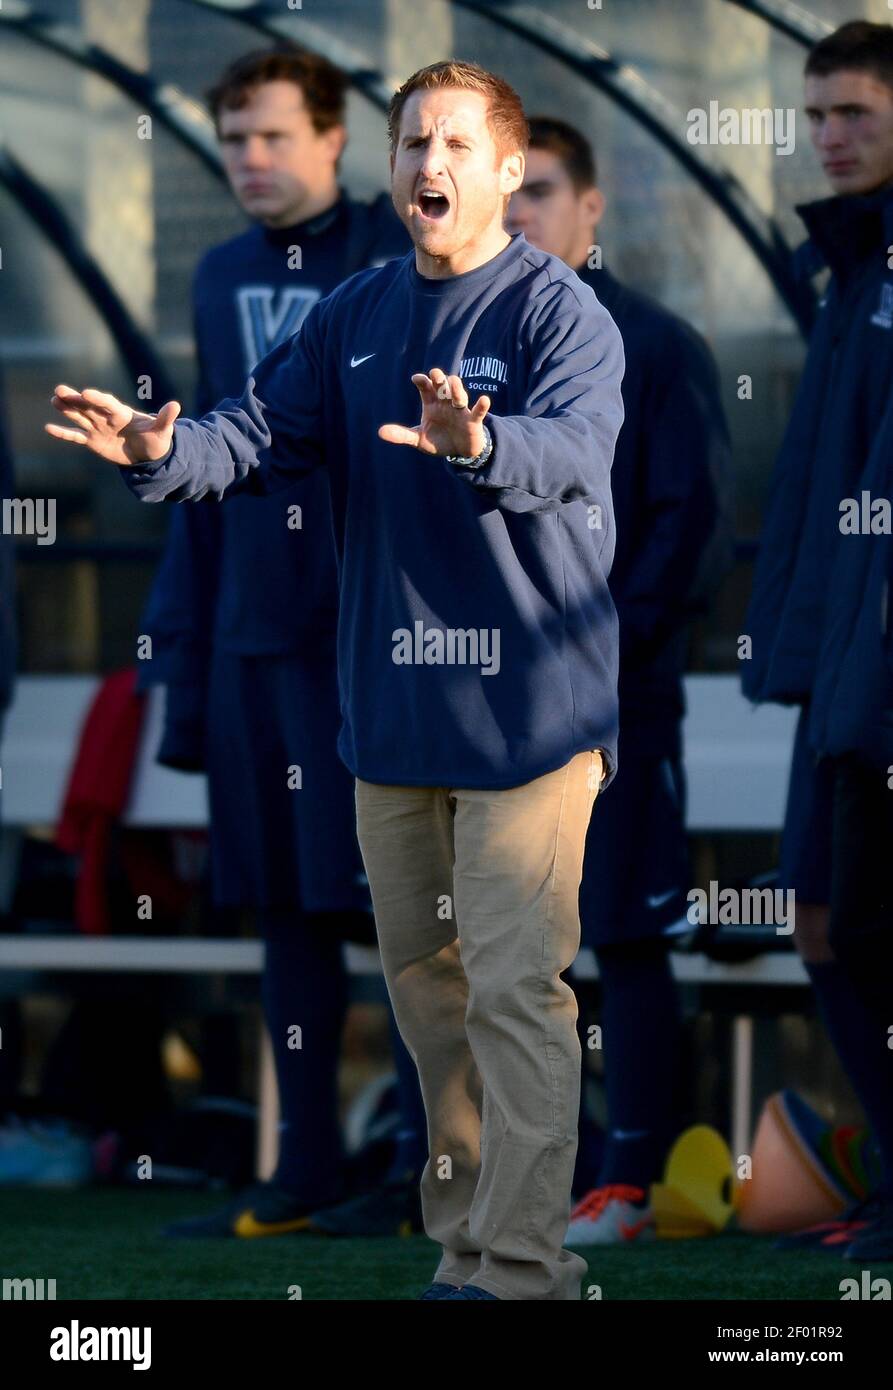 Head coach Tom Carlin of Villanova directs his player against Georgetown in  the second half at Shaw Field in Washington, D.C., Friday, Nov 8, 2013.  Georgetown defeated Villanova, 1-0. (Photo by Chuck